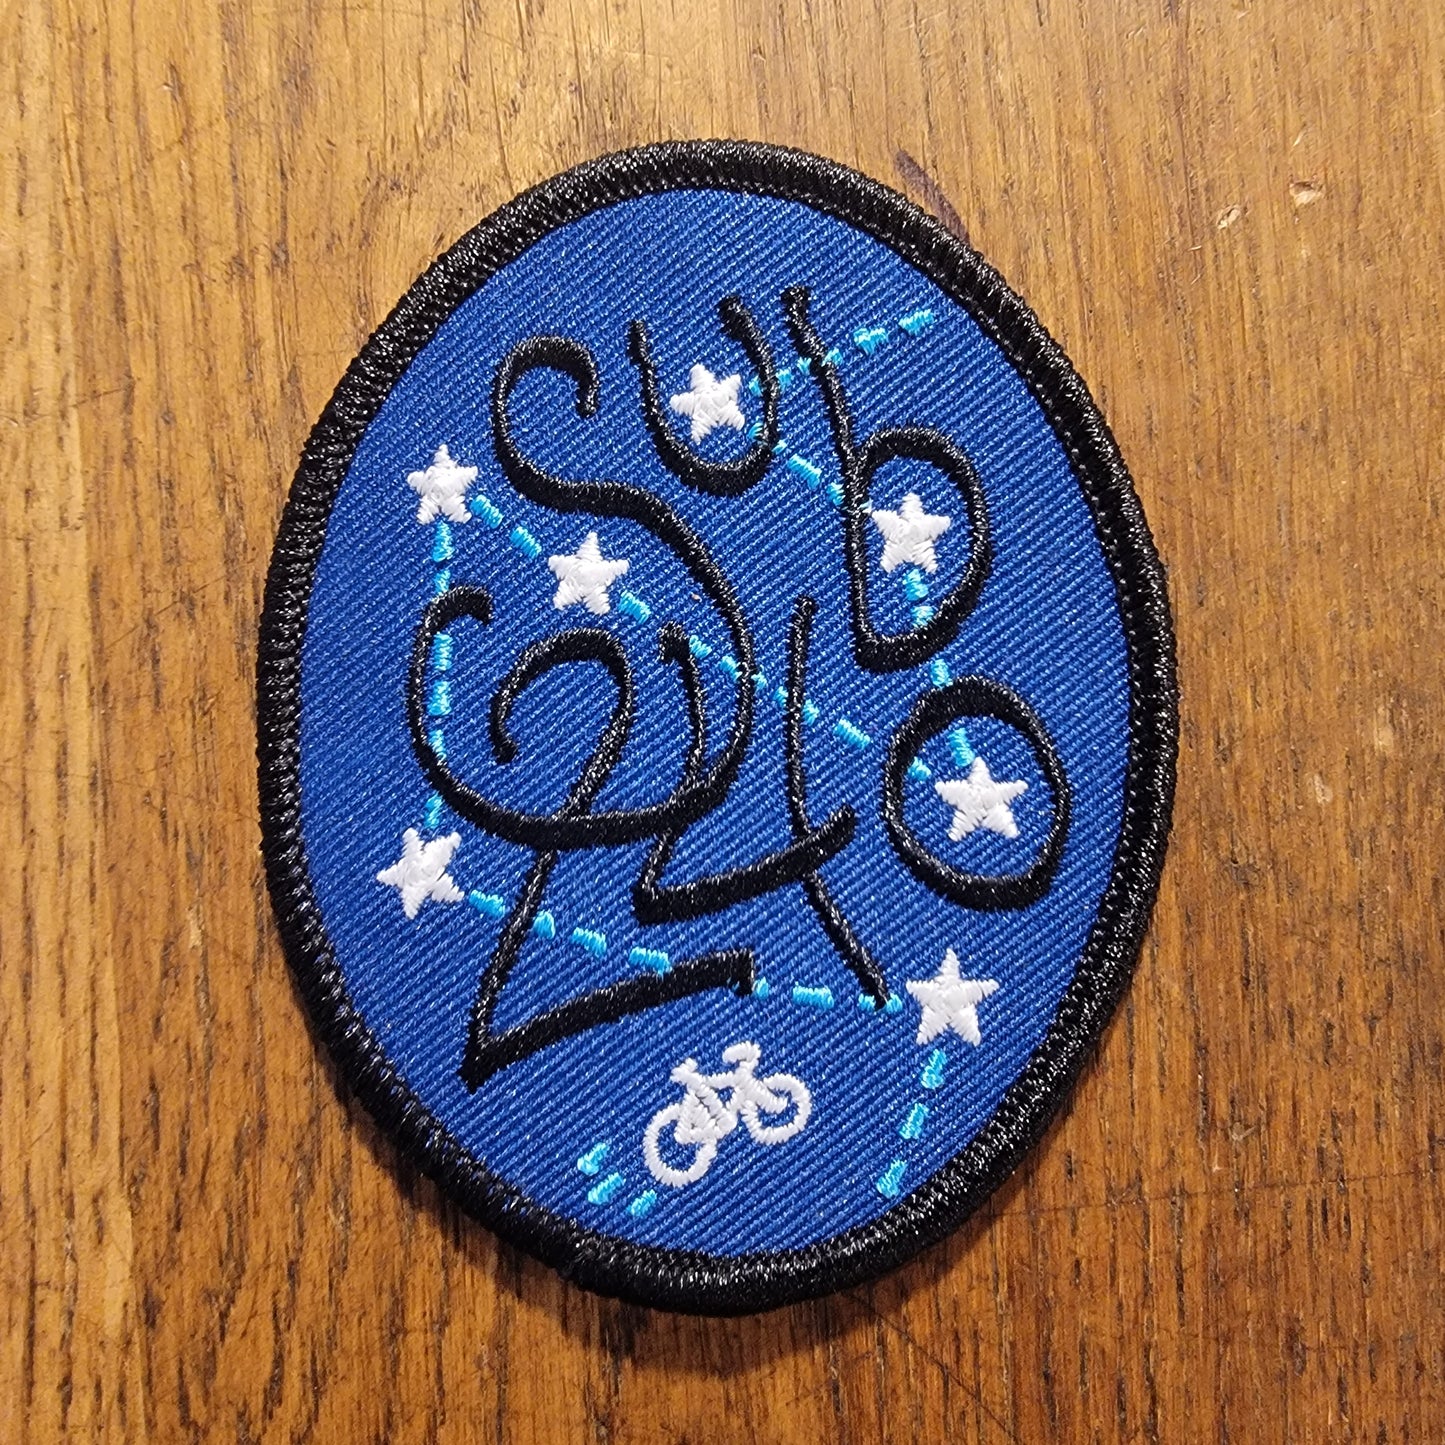 Nomad Sub 24 Glow in the Dark Patch